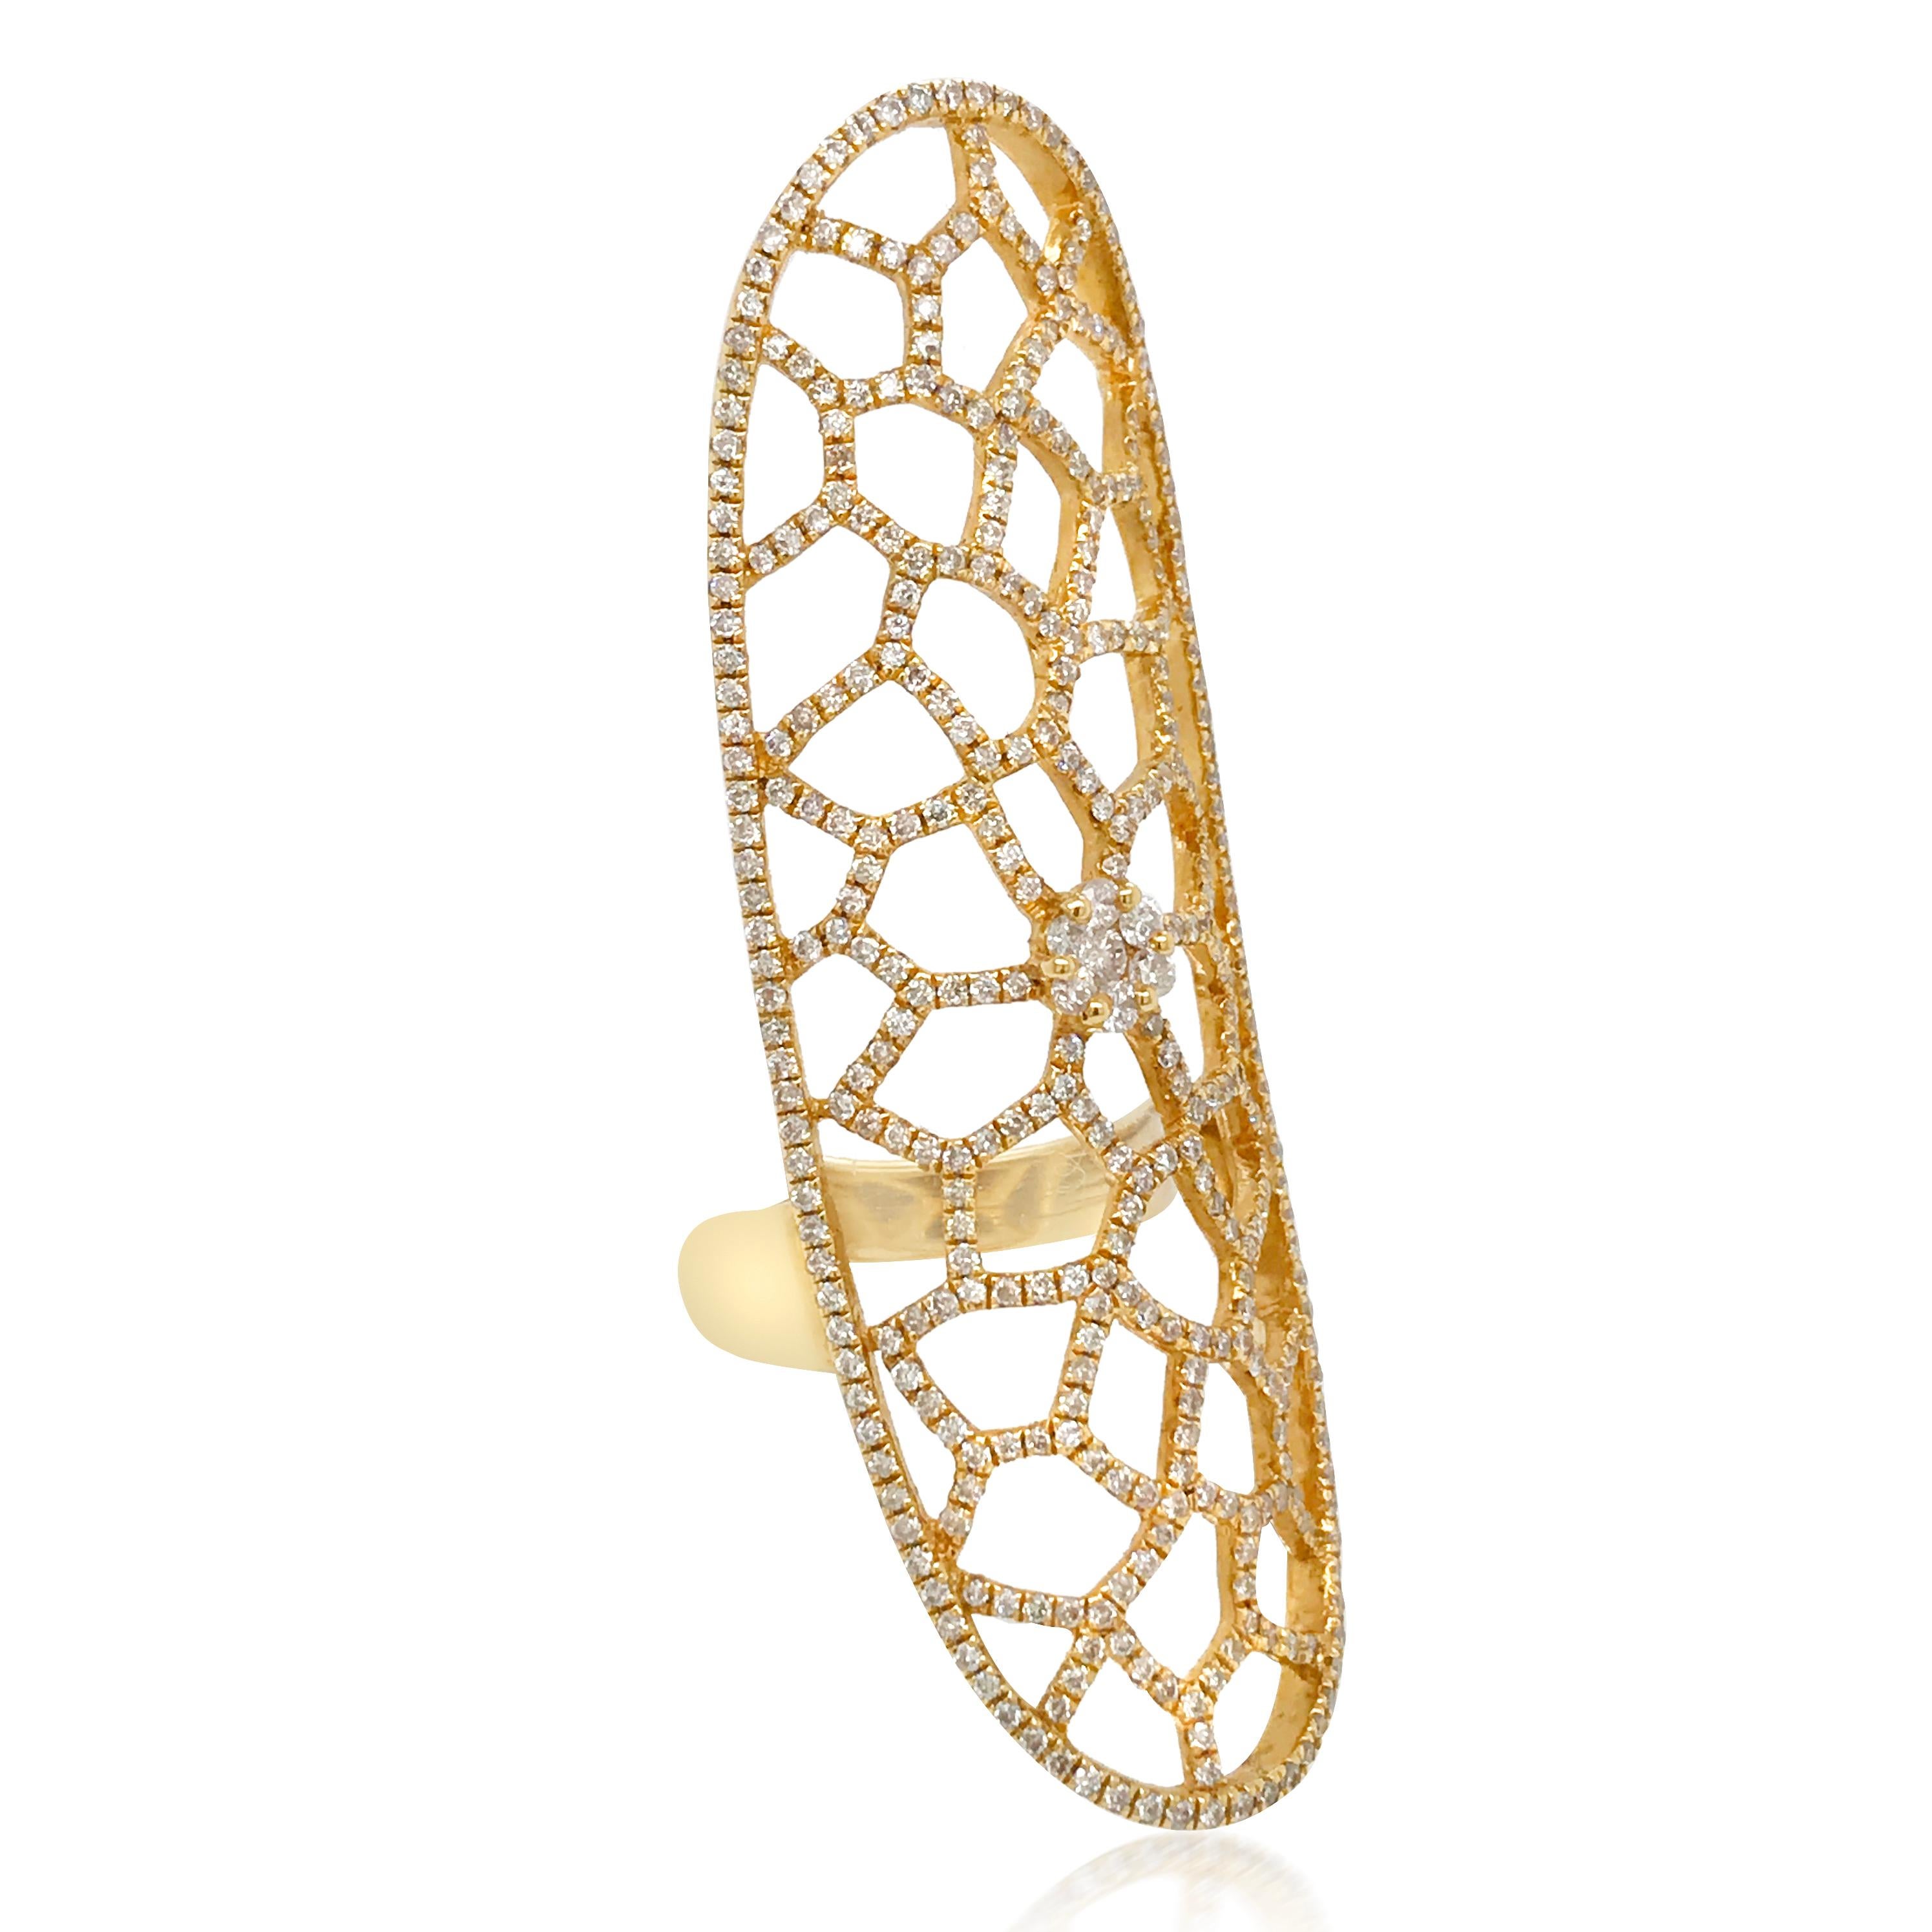 This artfully designed full-finger ring is crafted in 14K yellow gold, elongated filigree with approx. 1.5 carats of diamonds, SG. Signed Jacob and Co. Stamped D. The ring weighs 9.5 grams, is 55.4mm long, ring size 6.75.

Diamond total weight: